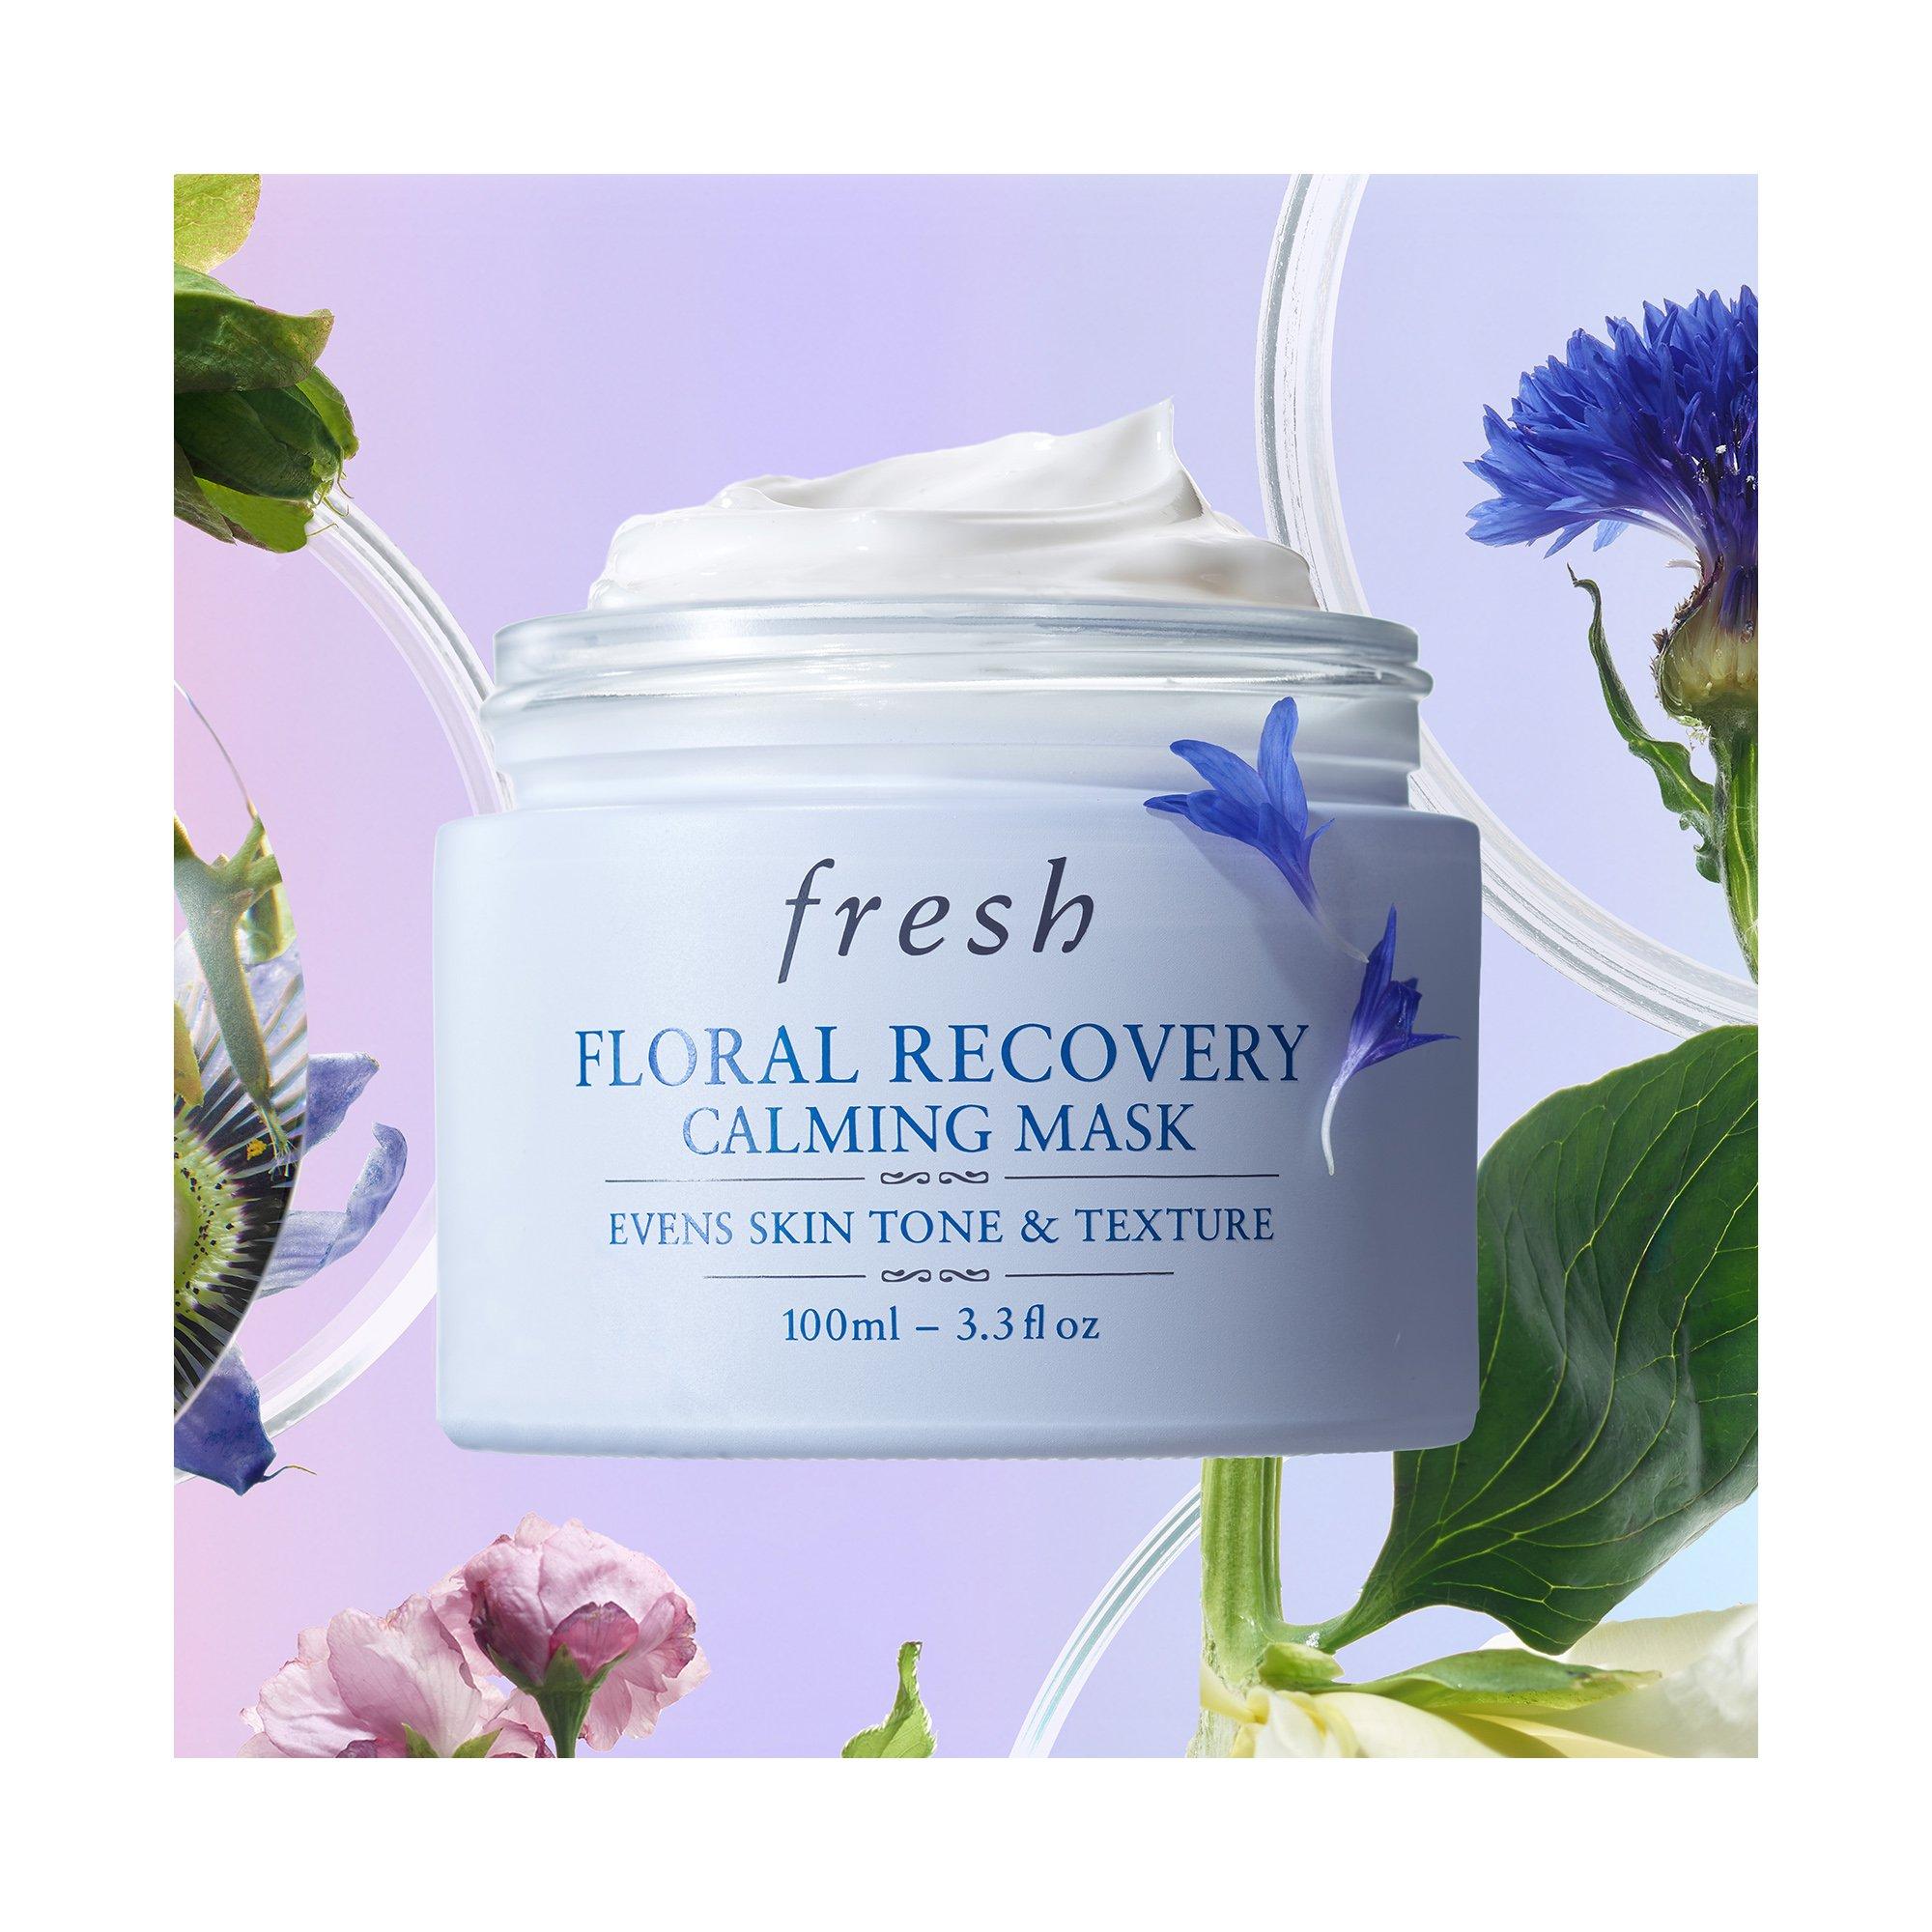 Fresh FLORAL RECOVERY Floral Recovery Calming Mask  